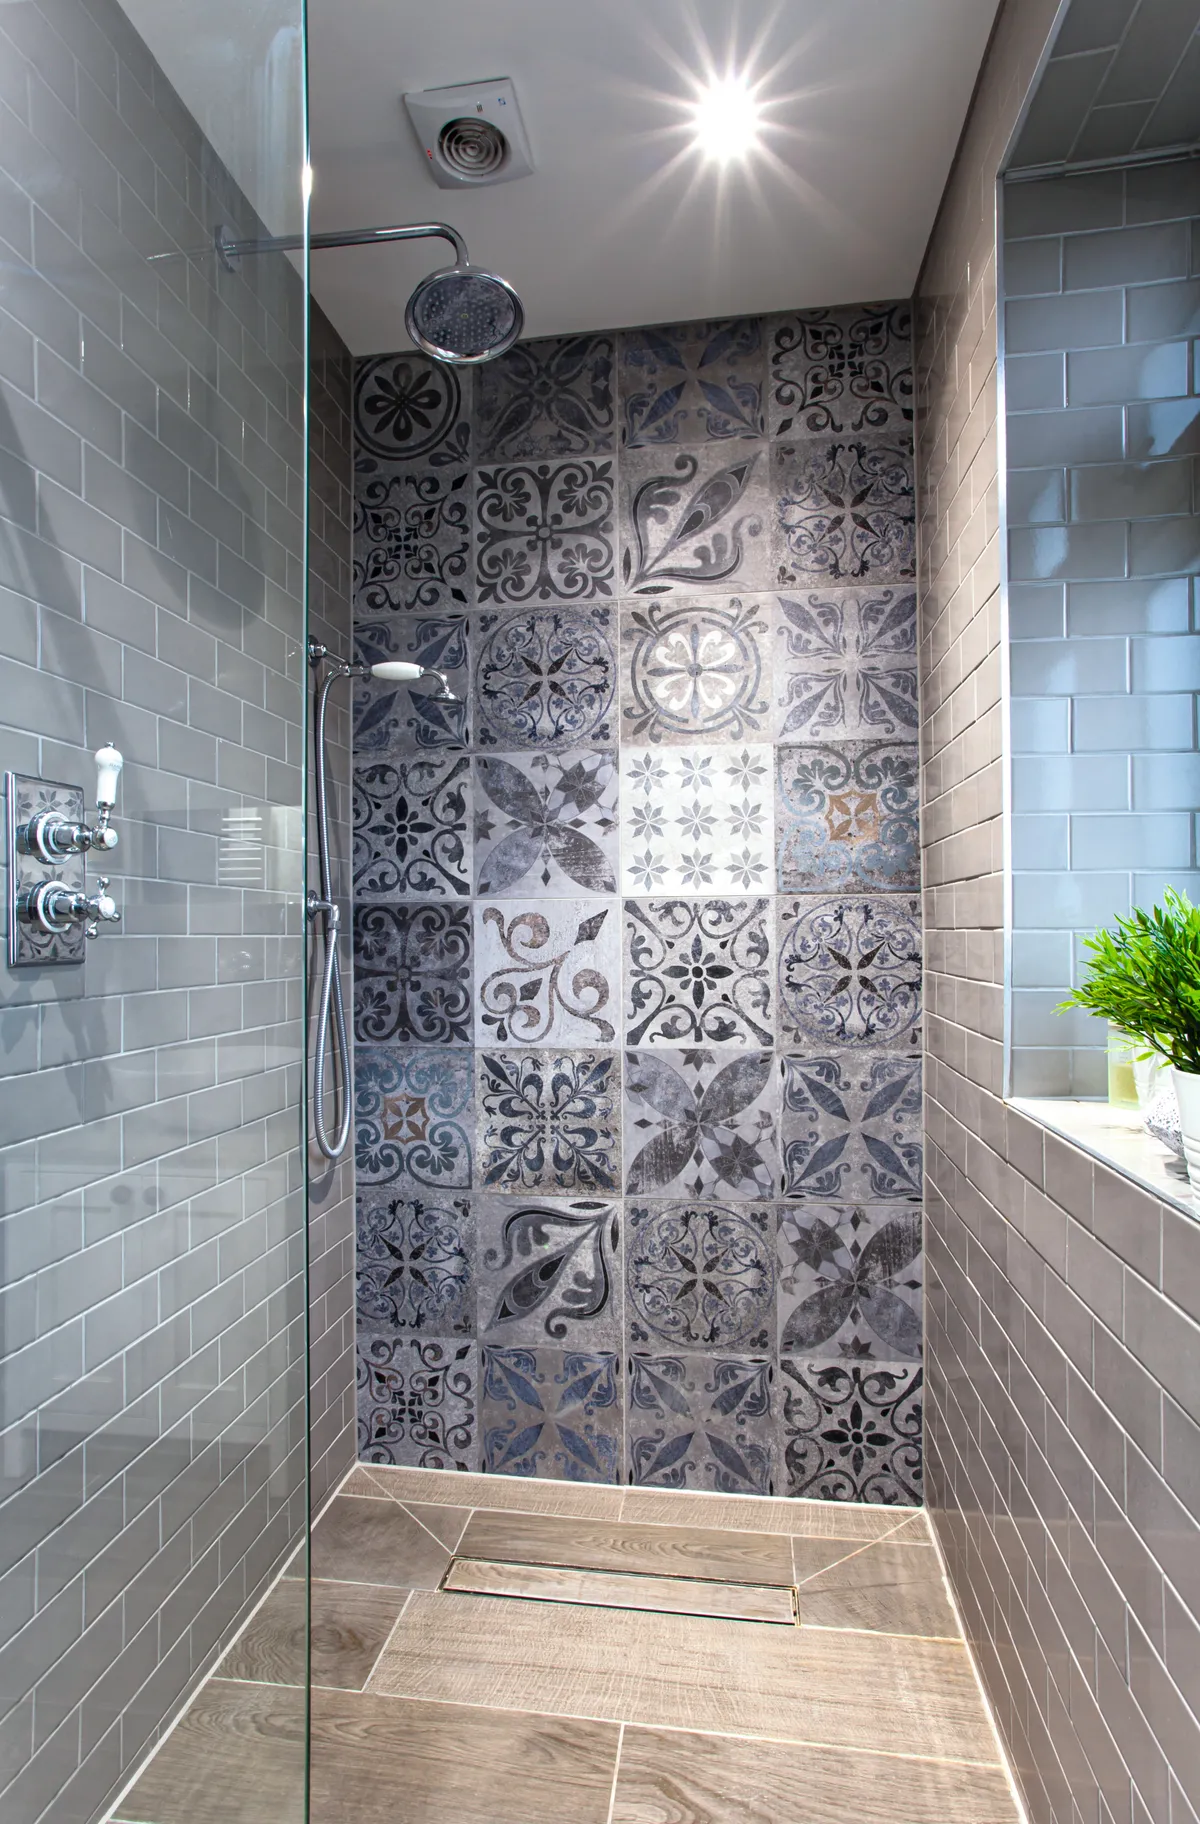 Choose vintage-style tiles to add a touch of personality and character